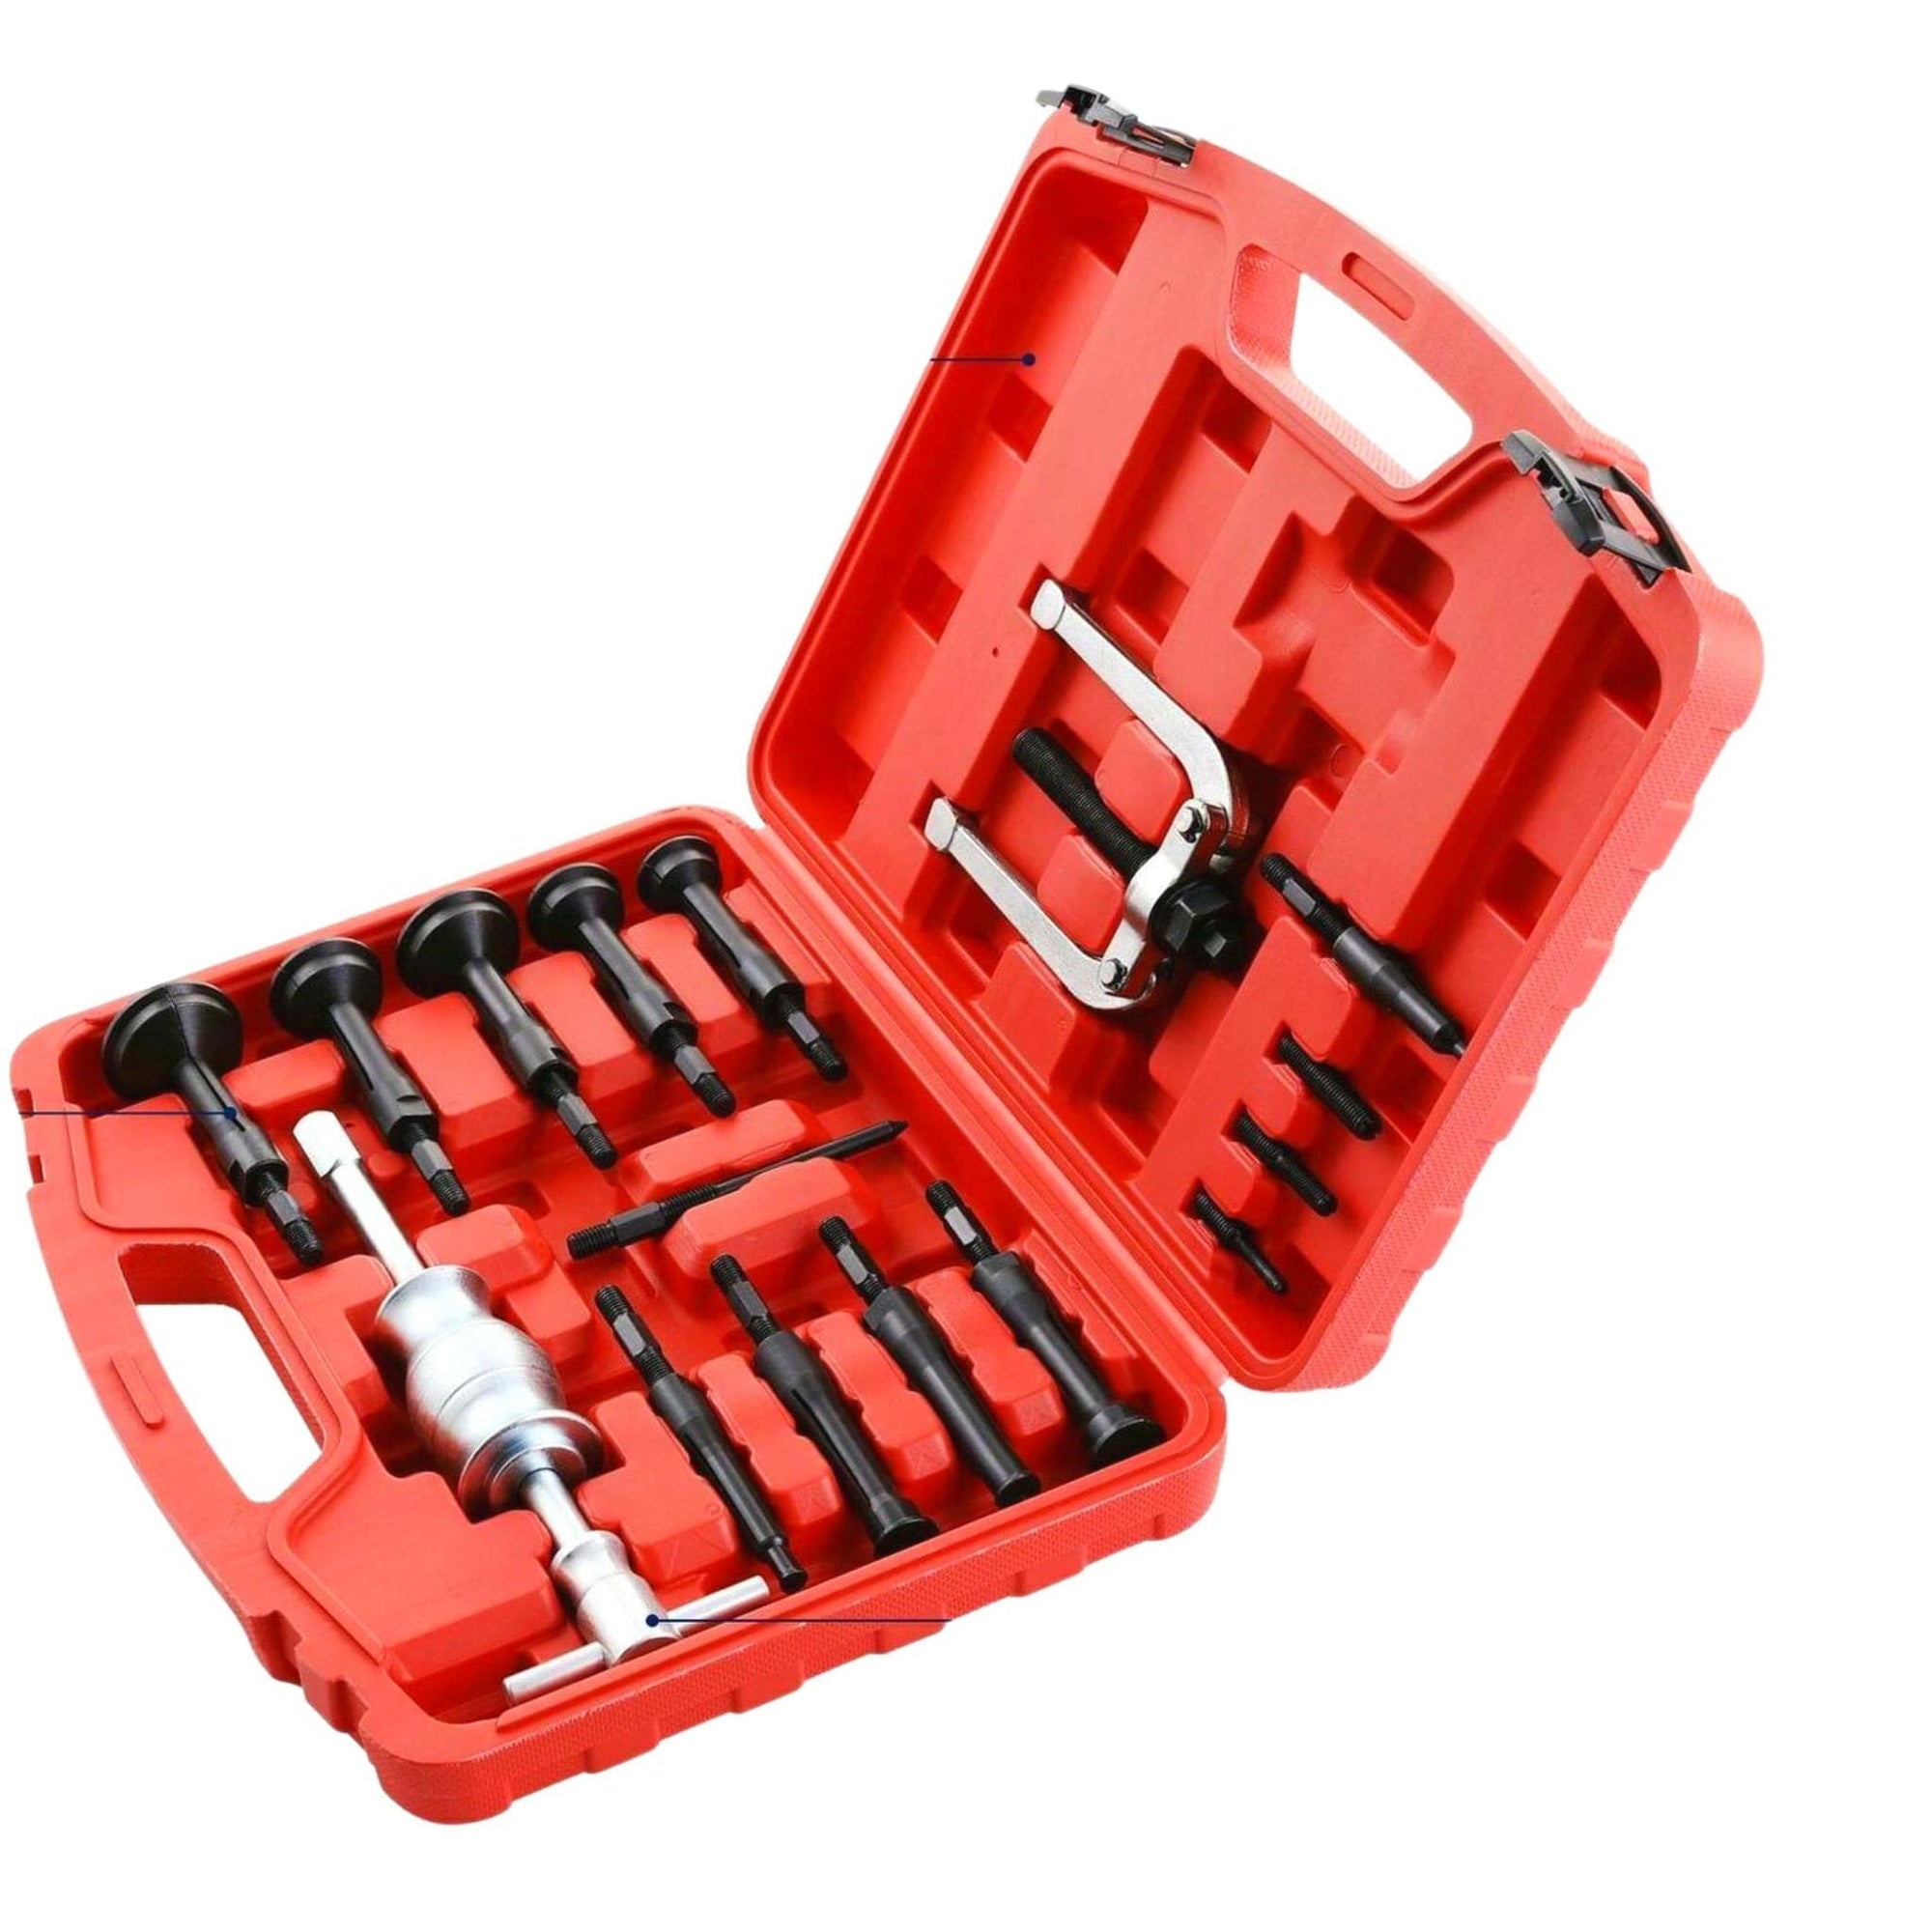 16 Piece Bearing Extractor Puller Kit - South East Clearance Centre